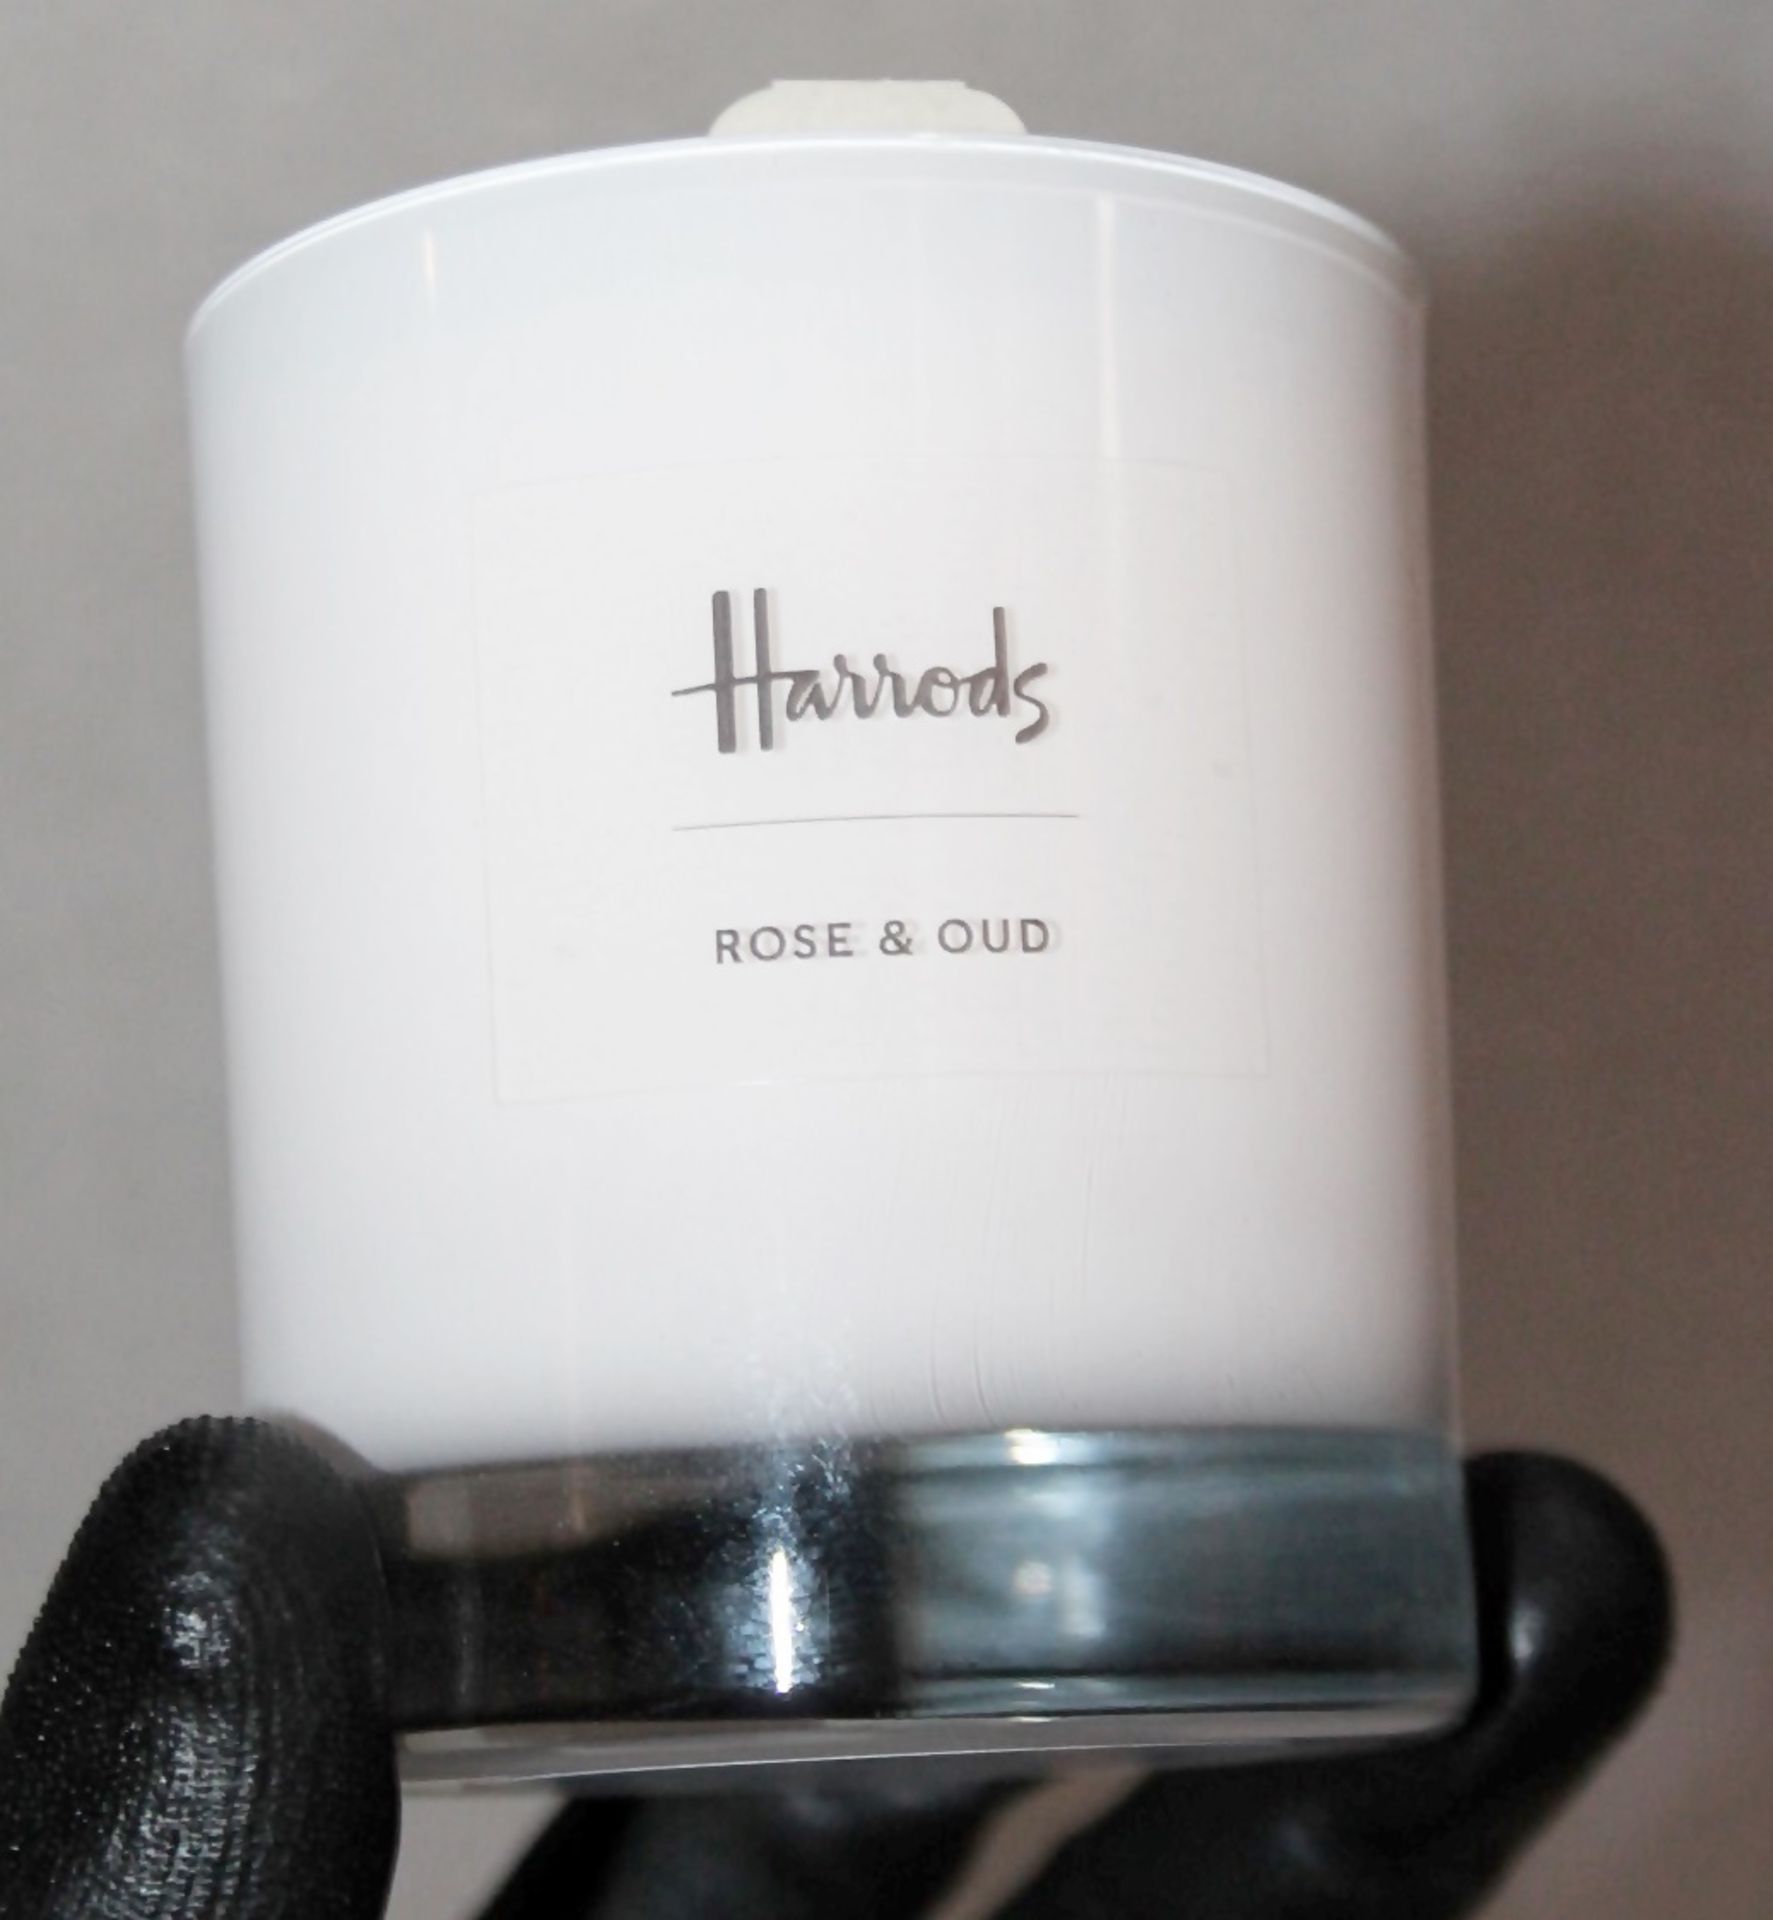 1 x HARRODS Rose And Oud Candle (230g) - Original Price £35.00 - Unused Boxed Stock - Image 6 of 6